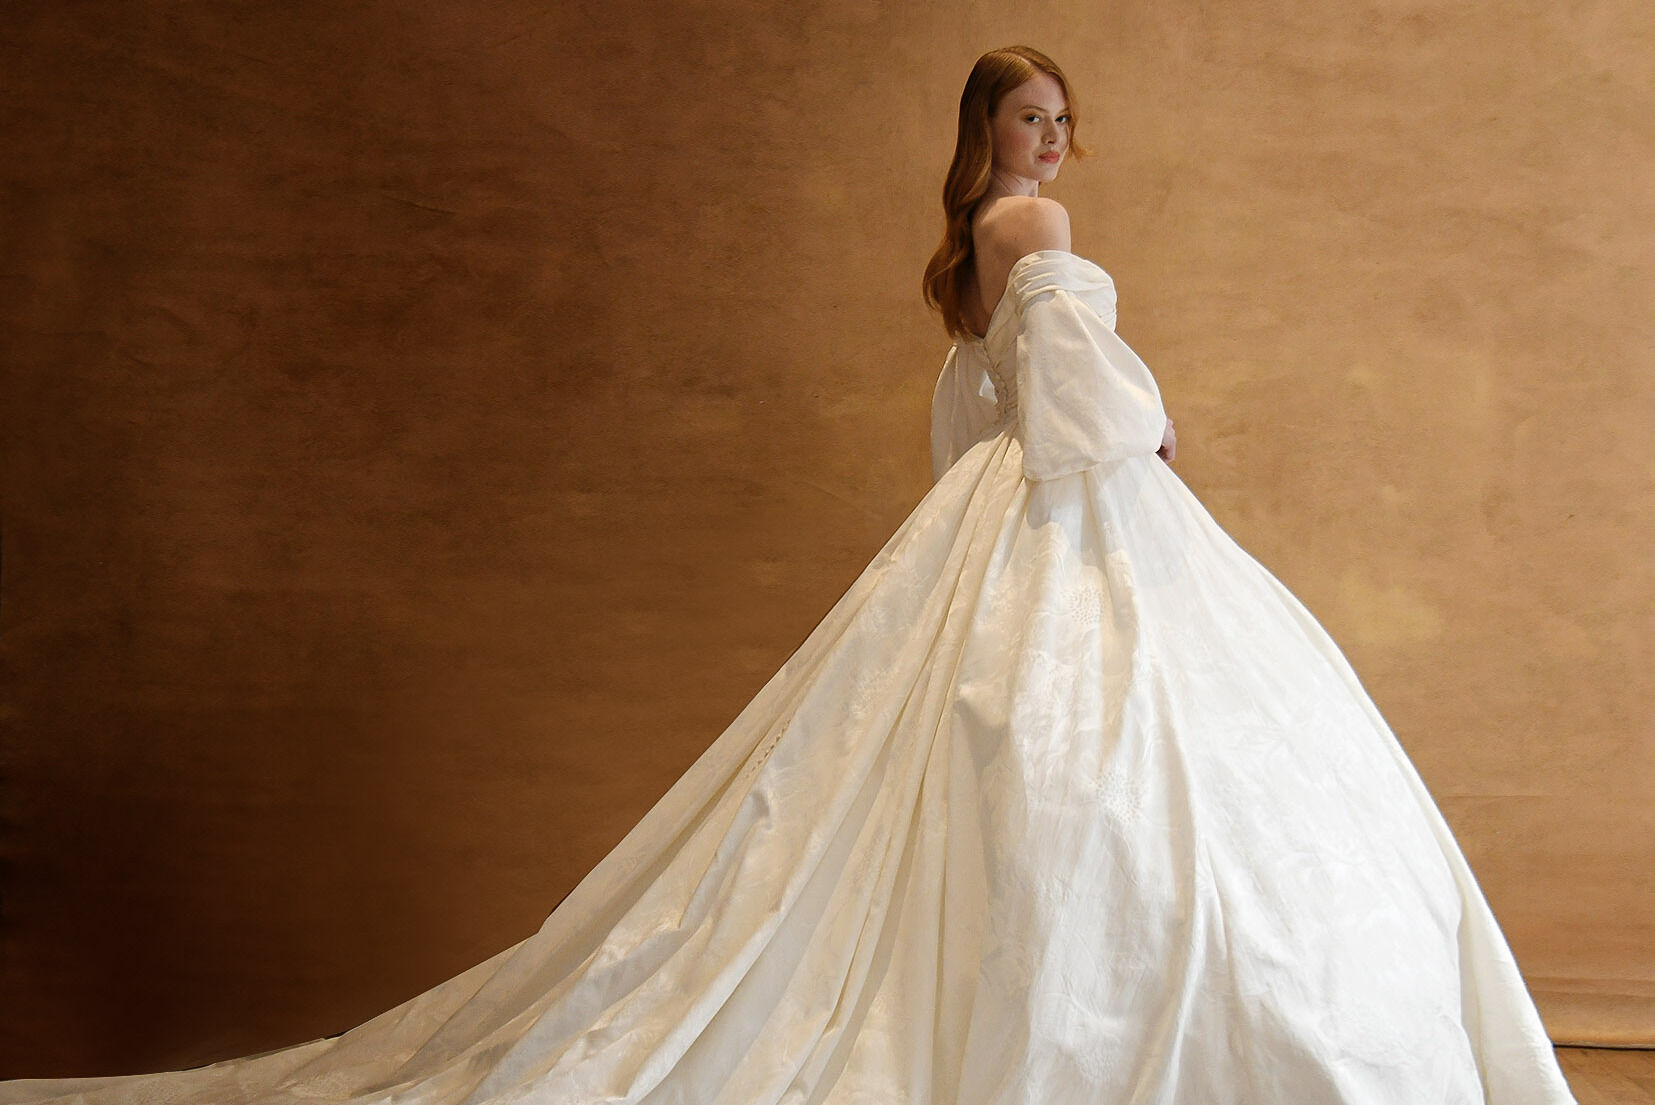 2023 Wedding dress trends: an off-the-shoulder neckline by Ines Di Santo